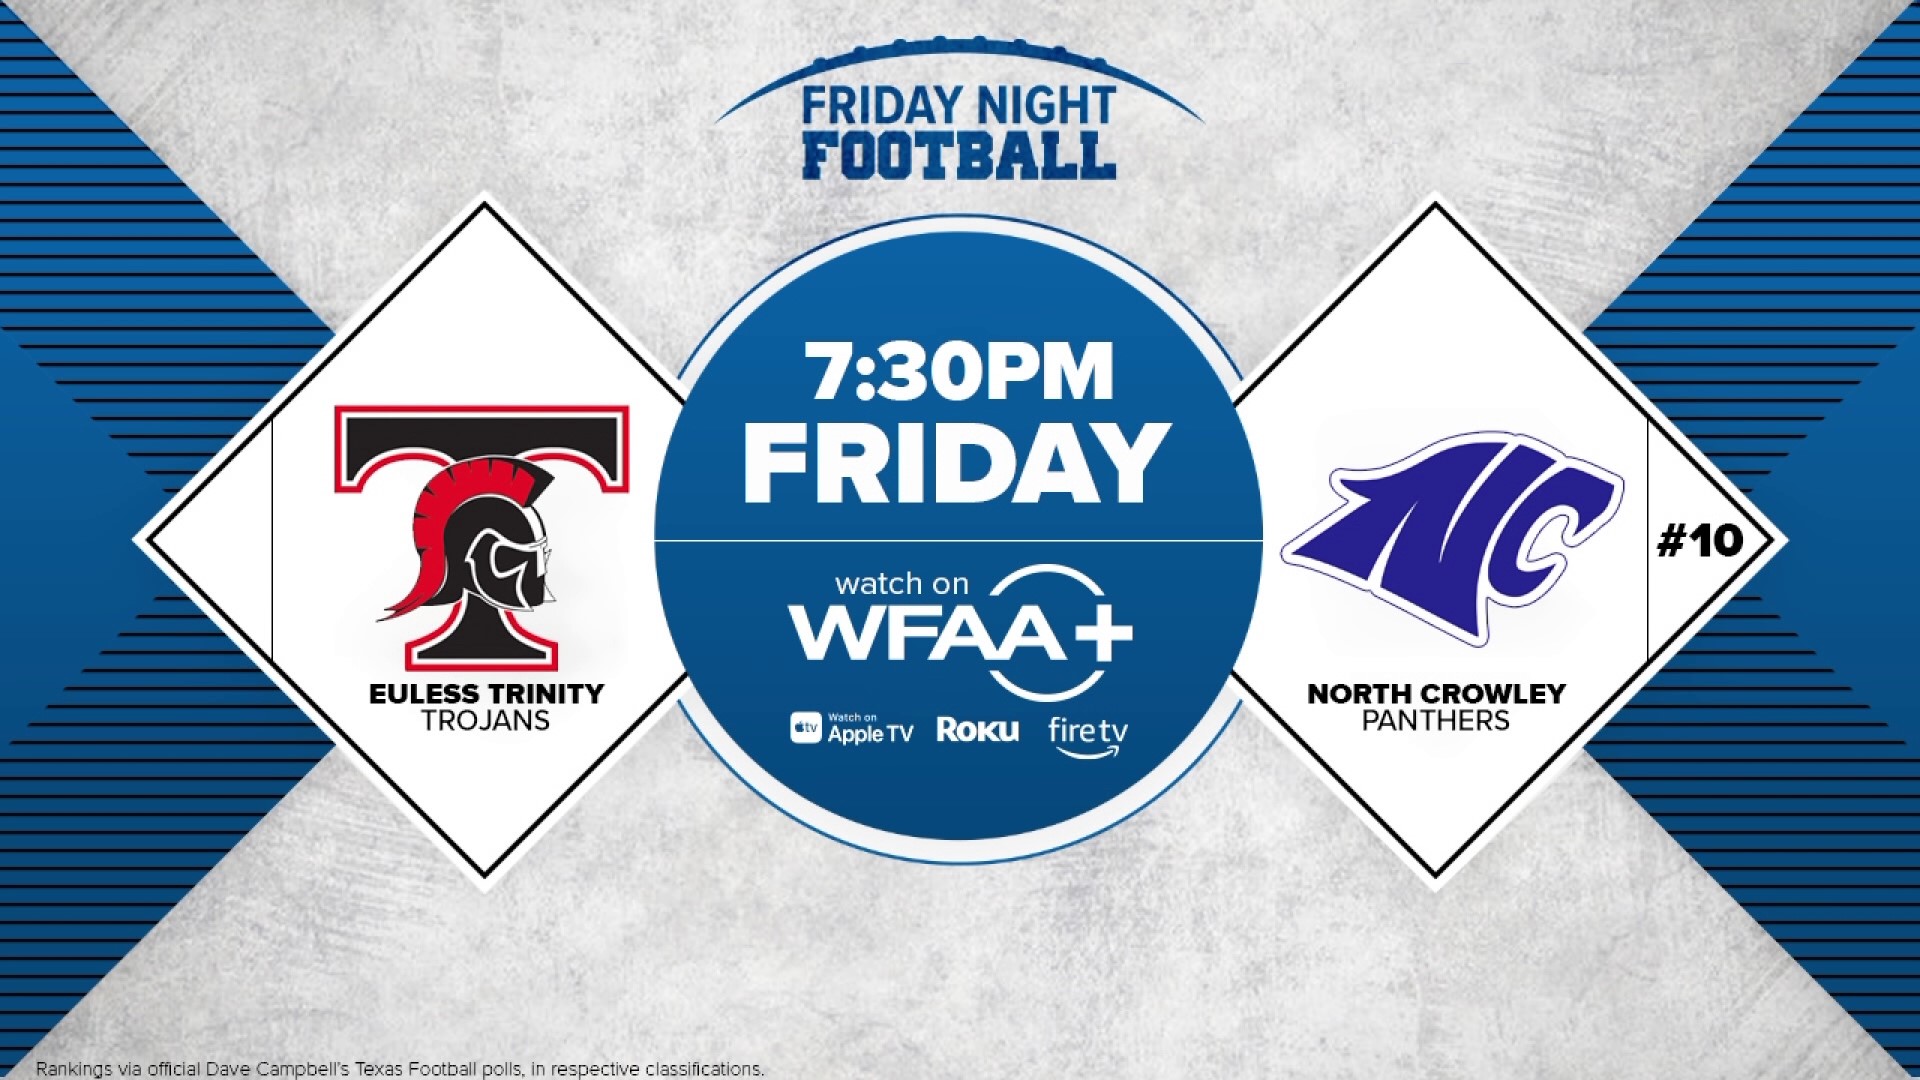 Euless Trinity, North Crowley to square off on Friday Night Football, streaming live on WFAA+ wfaa